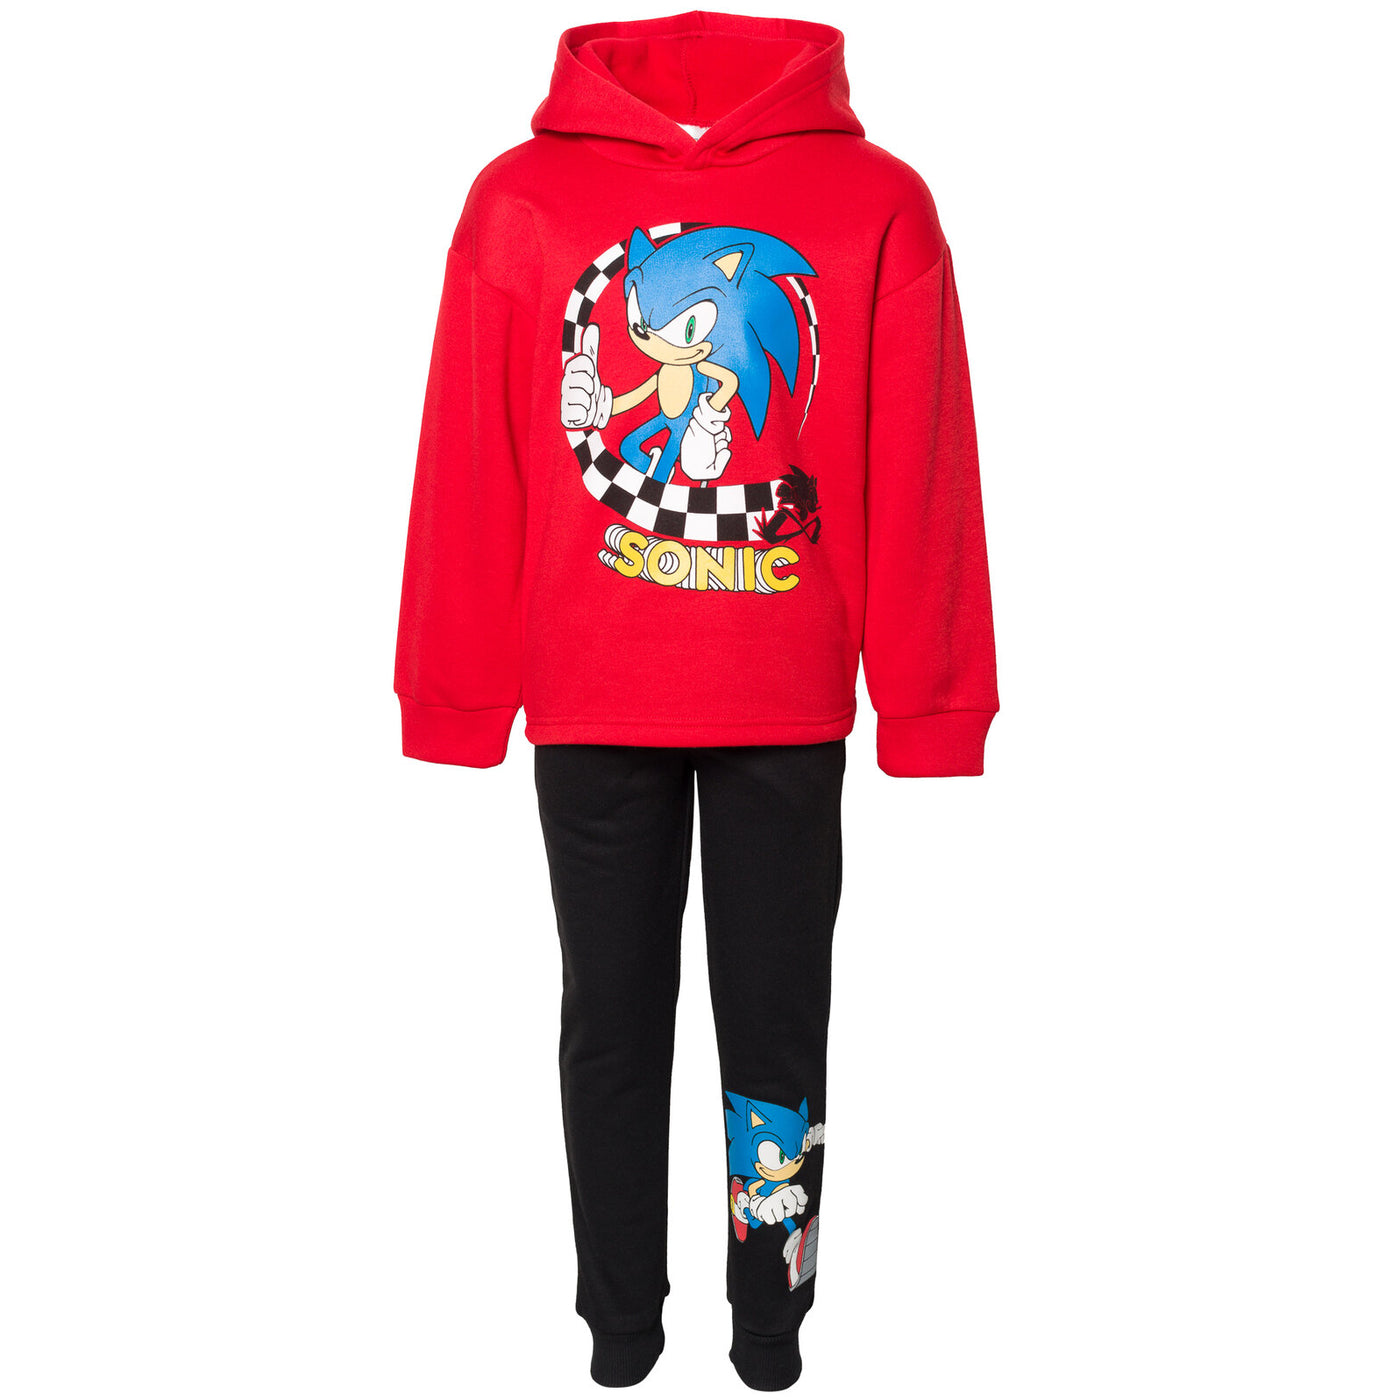 SEGA Sonic the Hedgehog Fleece Pullover Hoodie and Pants Outfit Set